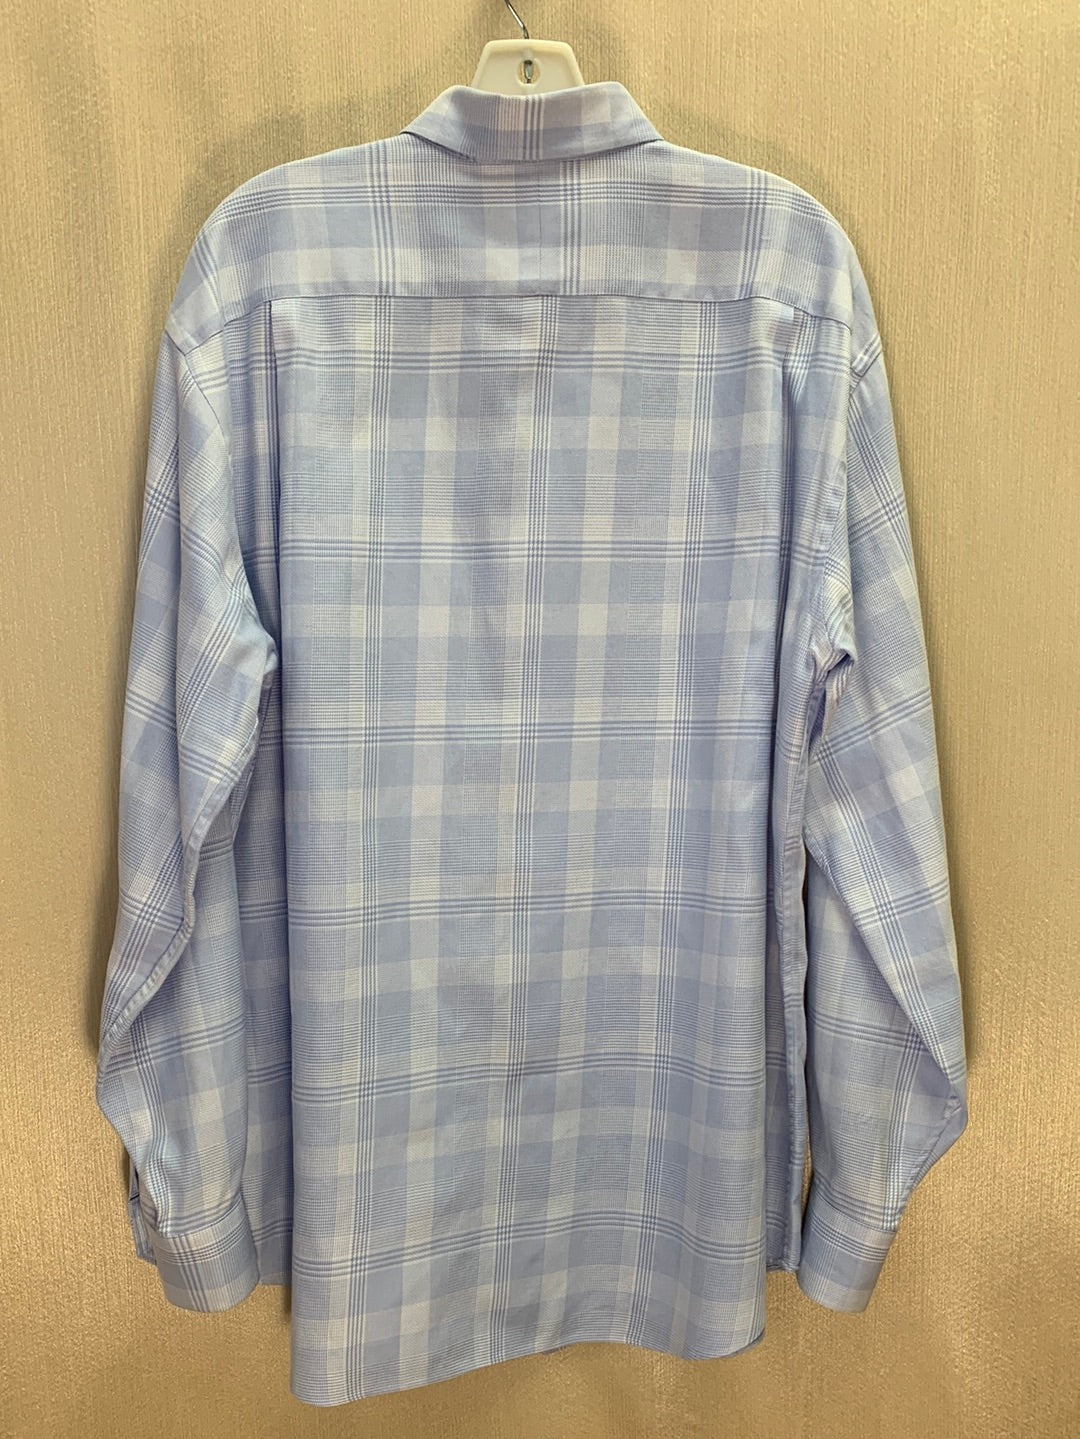 TOMMY BAHAMA blue white check Long Sleeve Button Up Shirt - 16 34-35